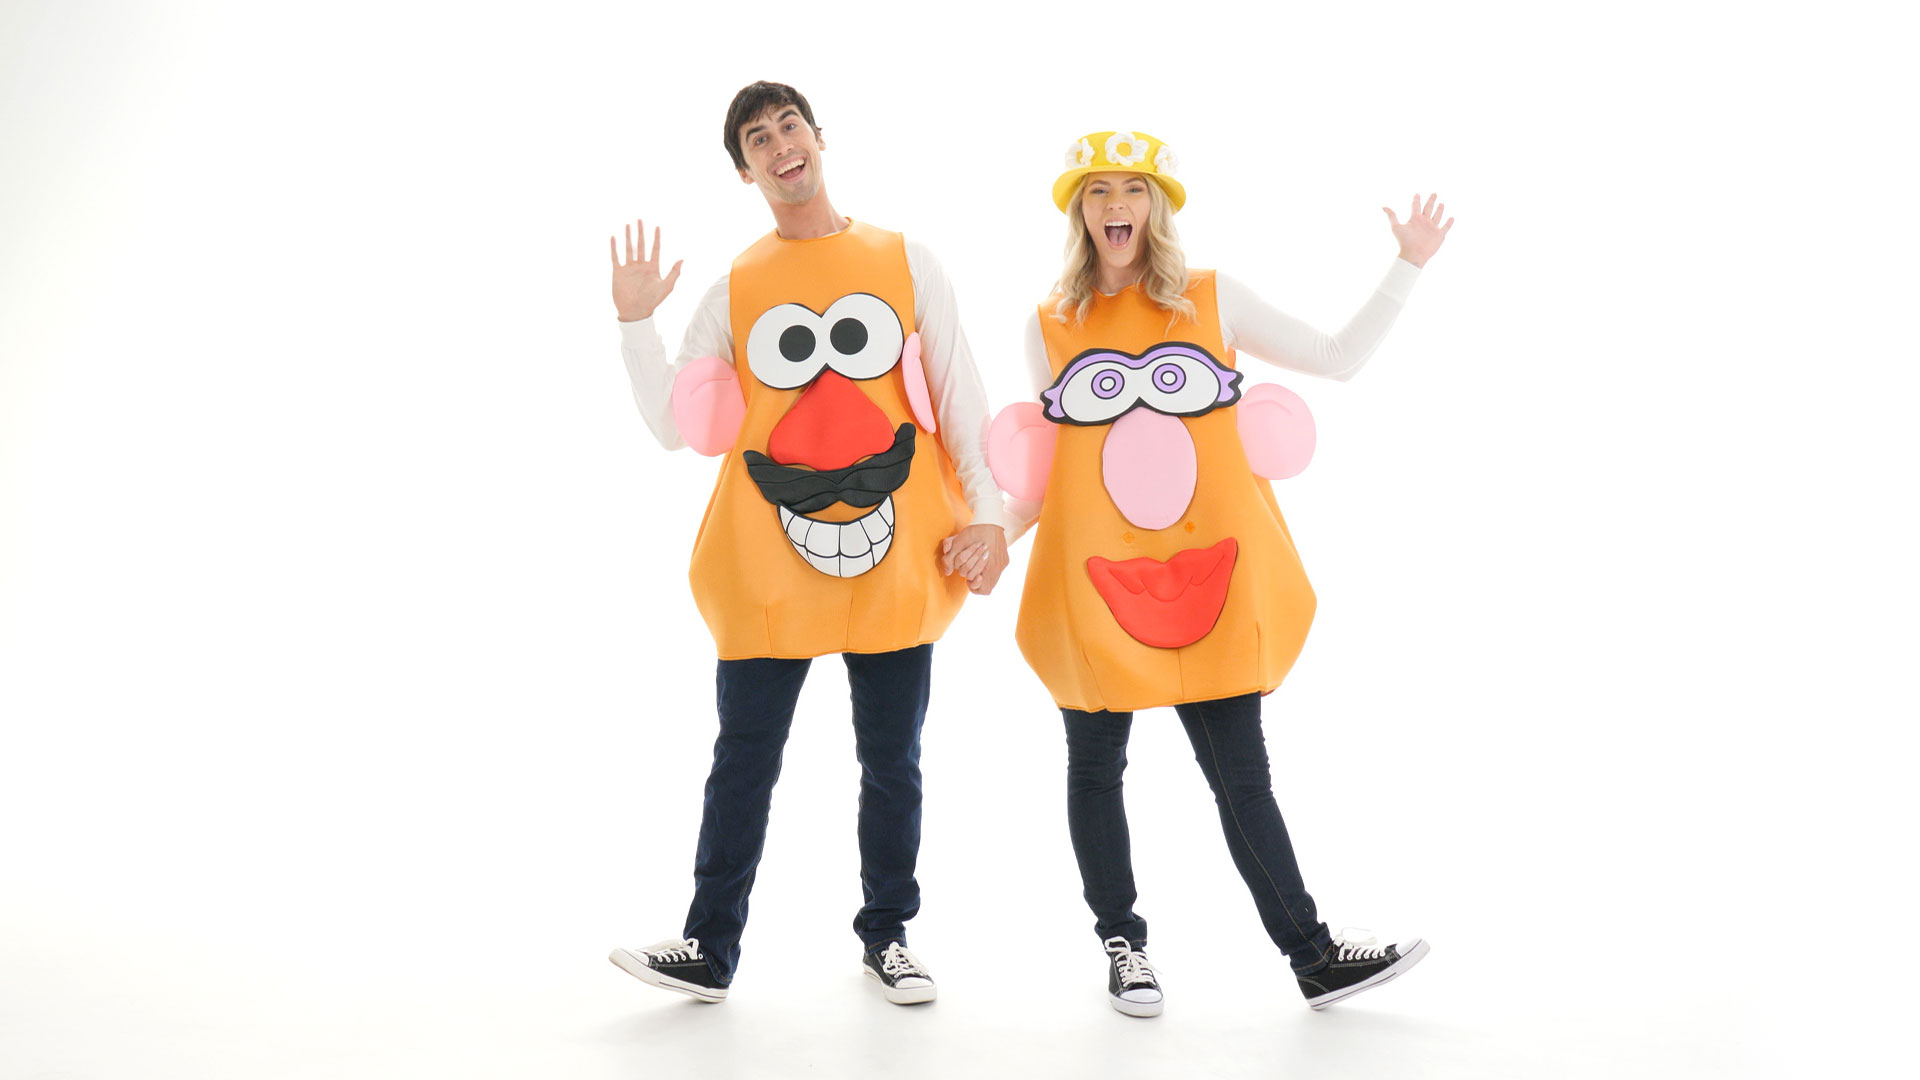 This Mr and Mrs Potato Head Costume is fun for Halloween and great as part of a Toy Story group costume.